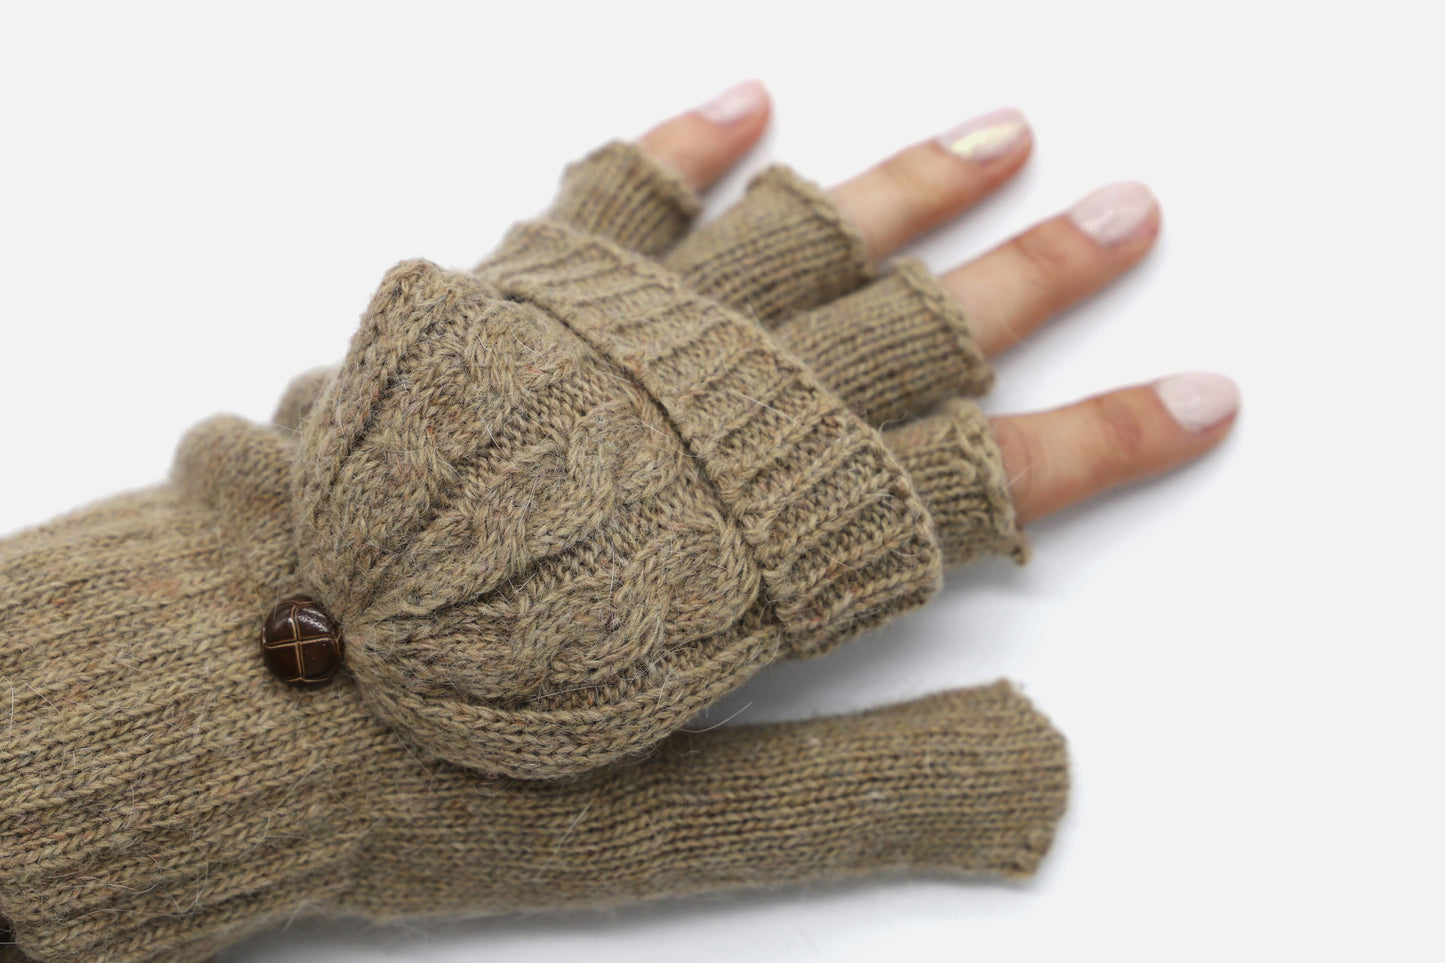 These flip-top gloves are finest gloves from Villanelle in taupe brown. A comfortable and useful accessory for women made from the softest wool blend for extreme comfort and warmth. The opening and closing cover gives you flexibility to grab things easily and the closing cover will keep you warm on cold, winter, autumn, spring days. This product is sourced and manufactured in Poland.